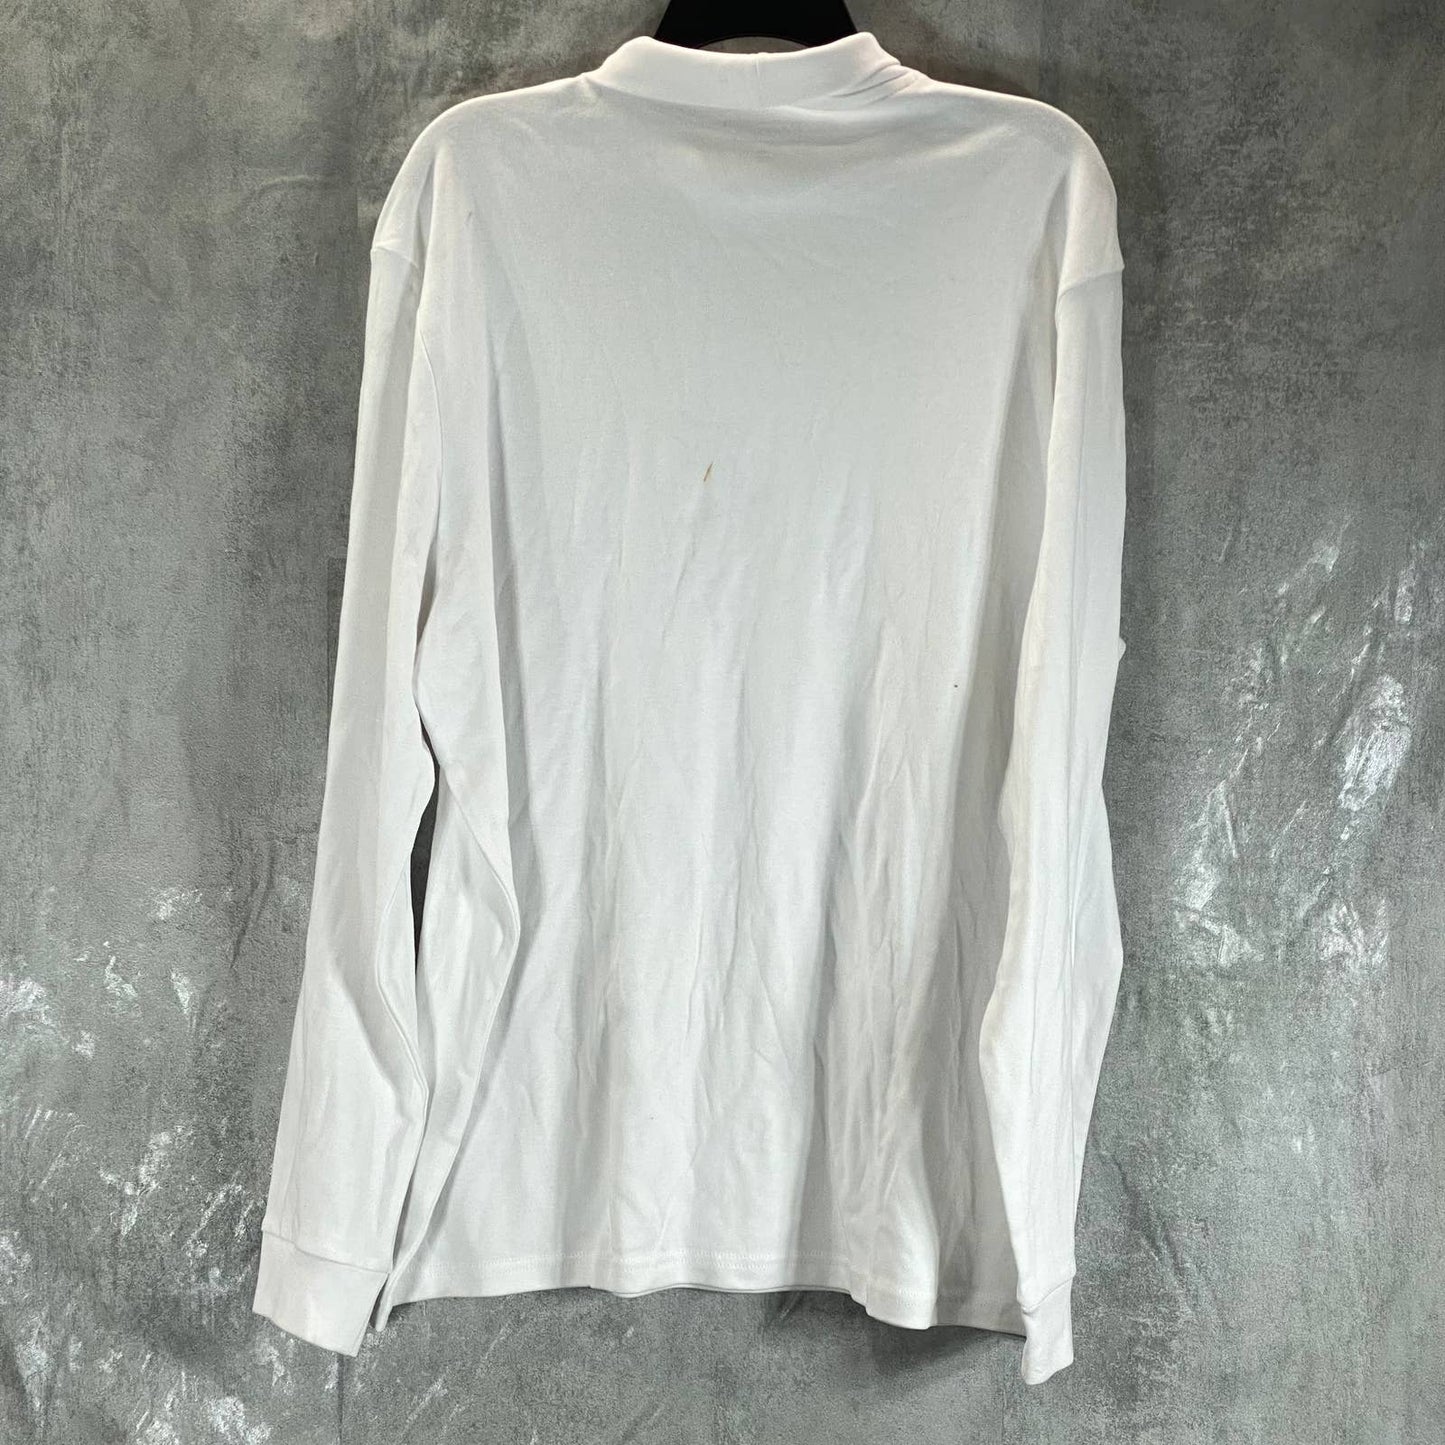 CLUB ROOM Men's White Solid Mock-Neck Long-Sleeve Pullover Shirt SZ XL